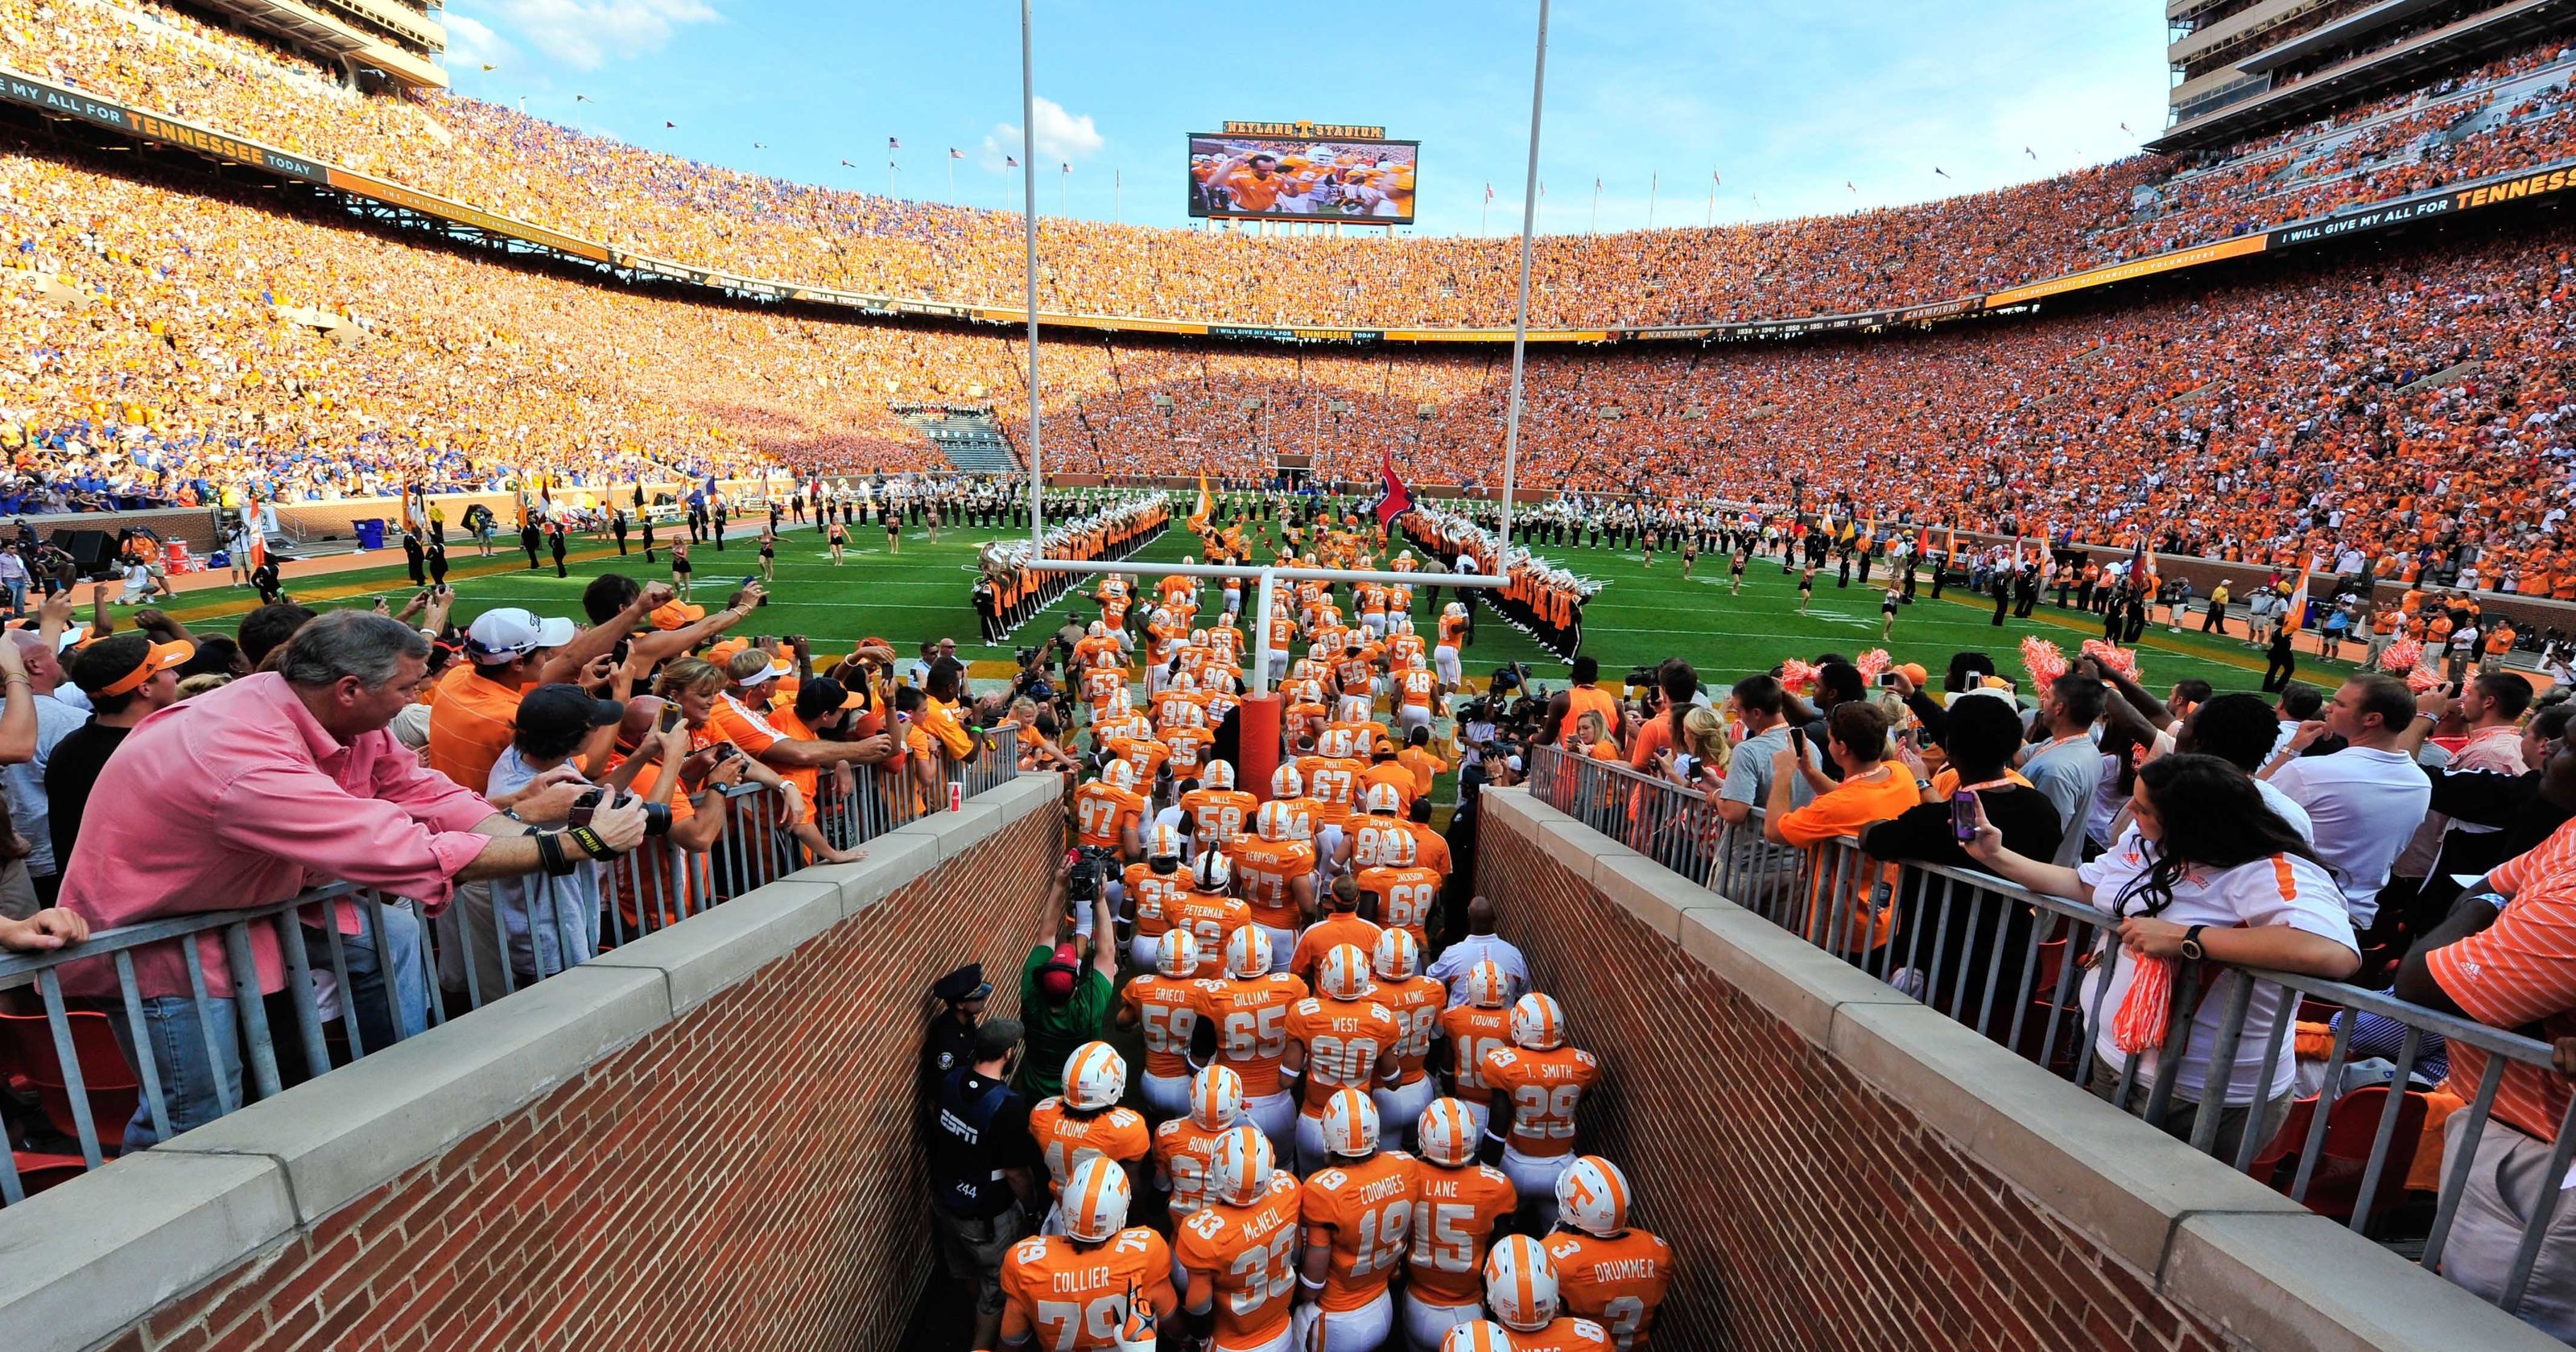 Tennessee Athletics Over Million In Debt